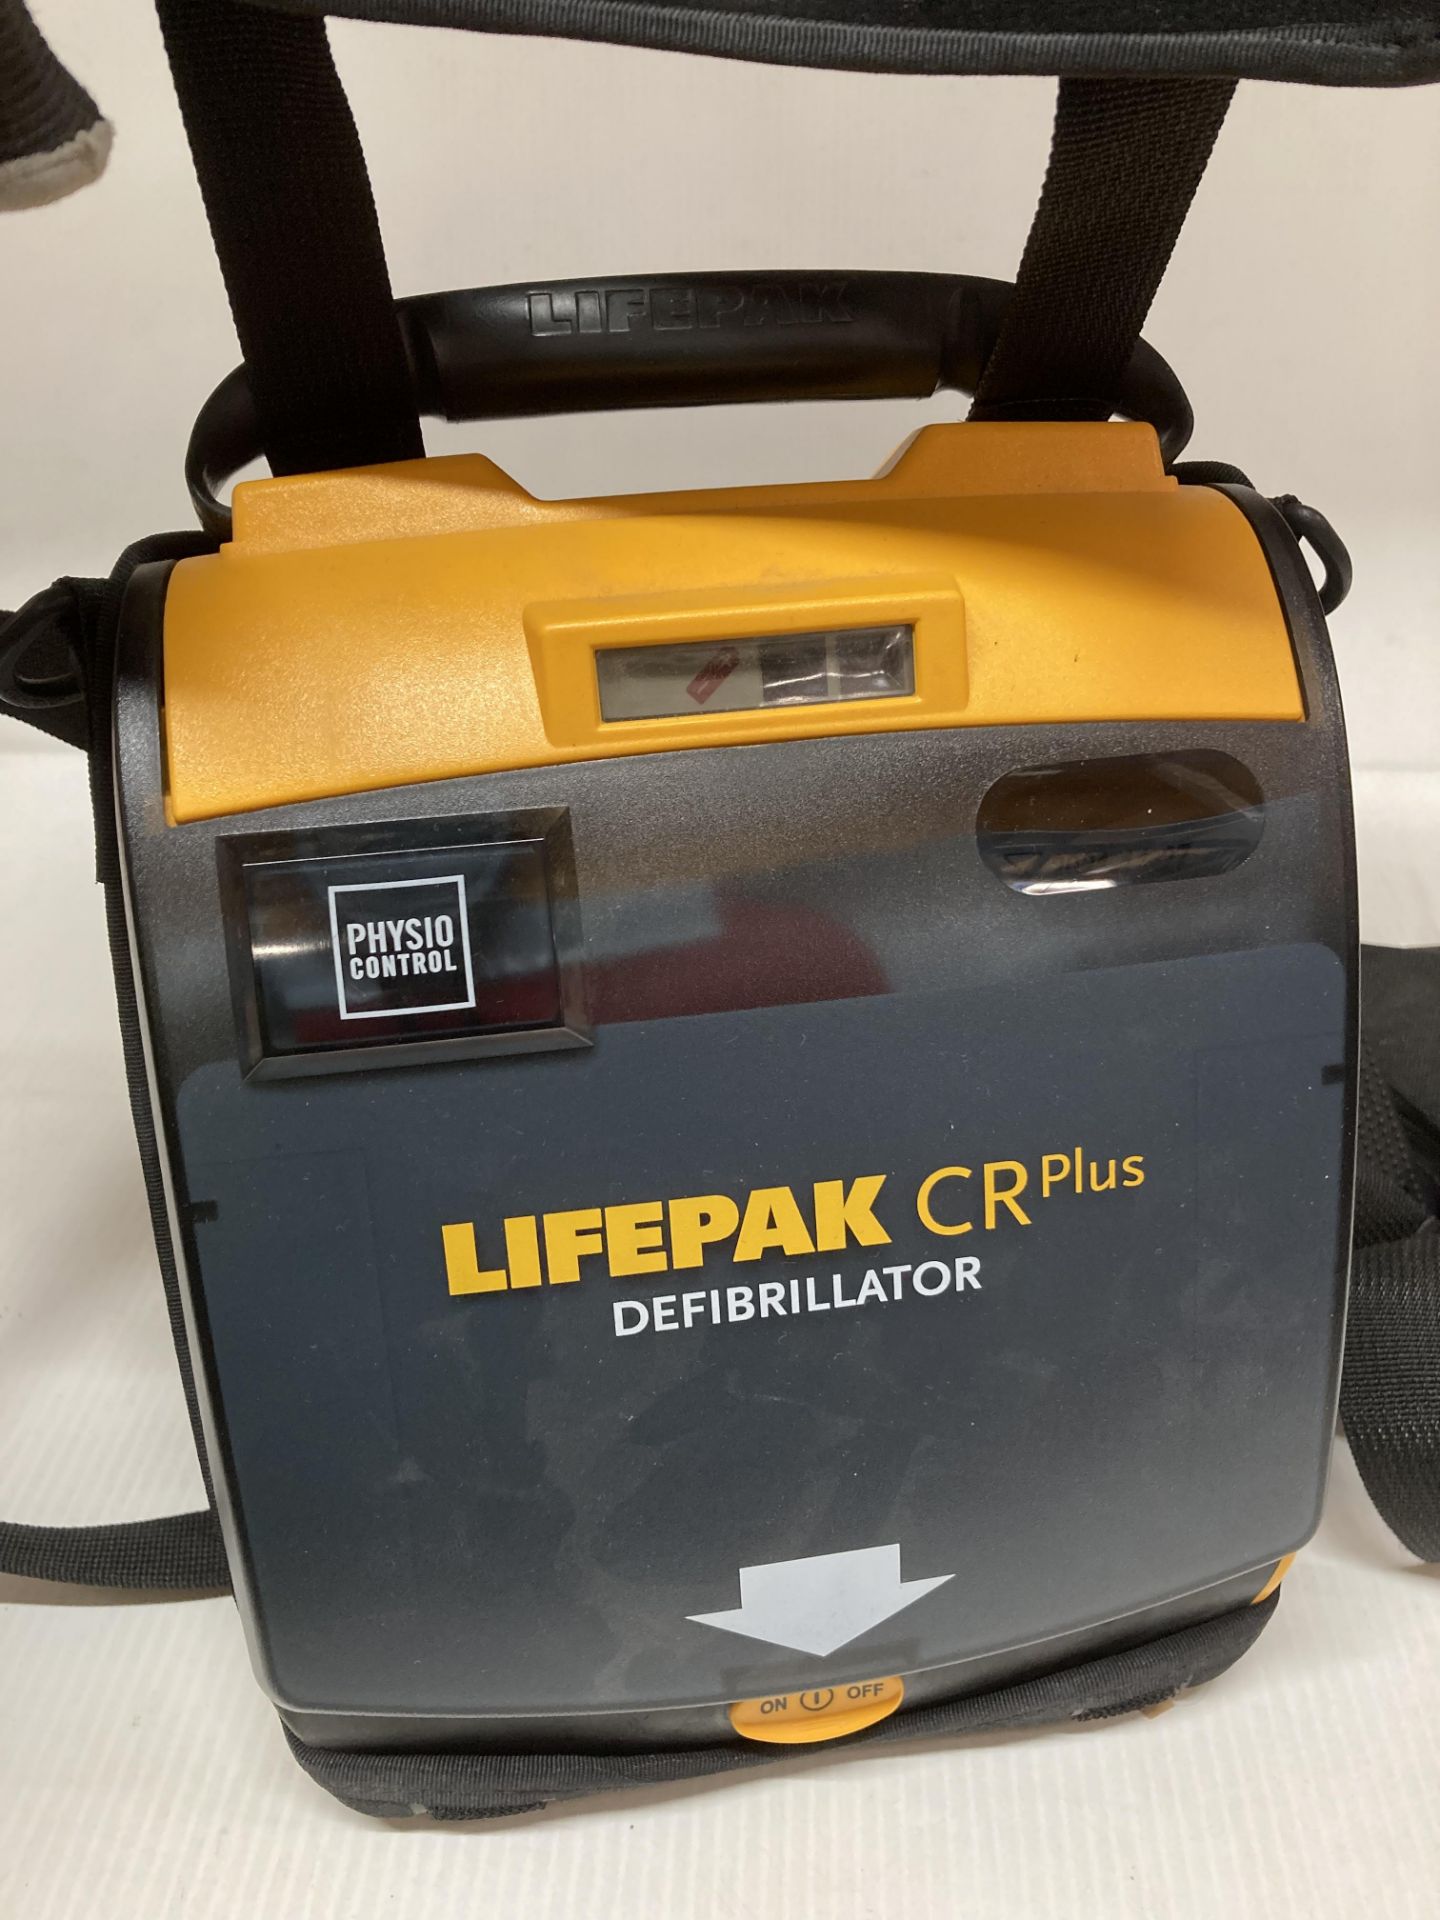 LifePak CR plus defibrillator by Physio control in a carrying case (saleroom location: Y01) - Image 2 of 2